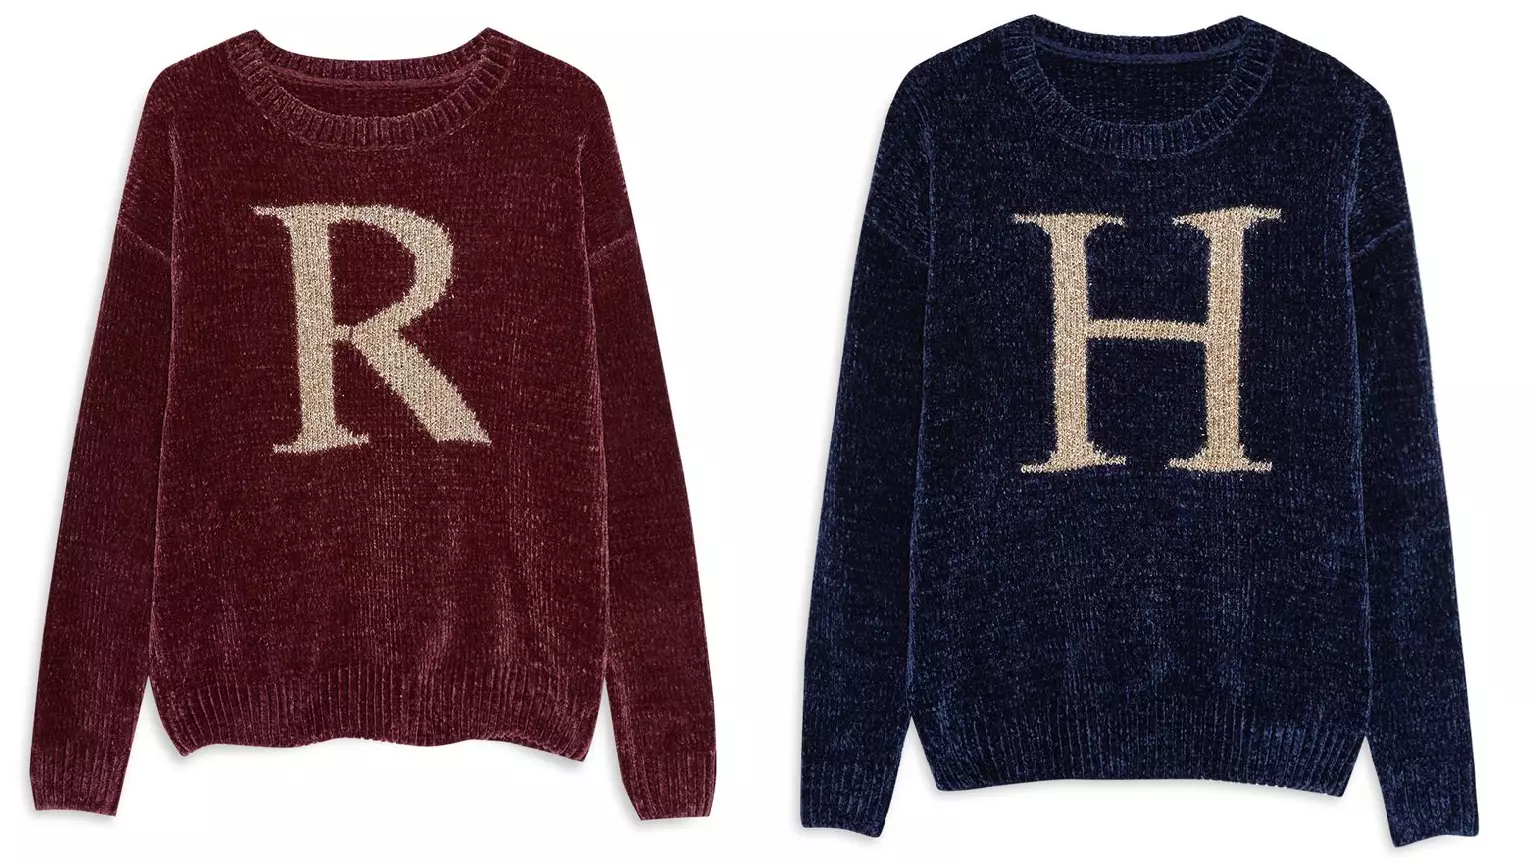 Primark's Selling Harry Potter-Themed Christmas Jumpers